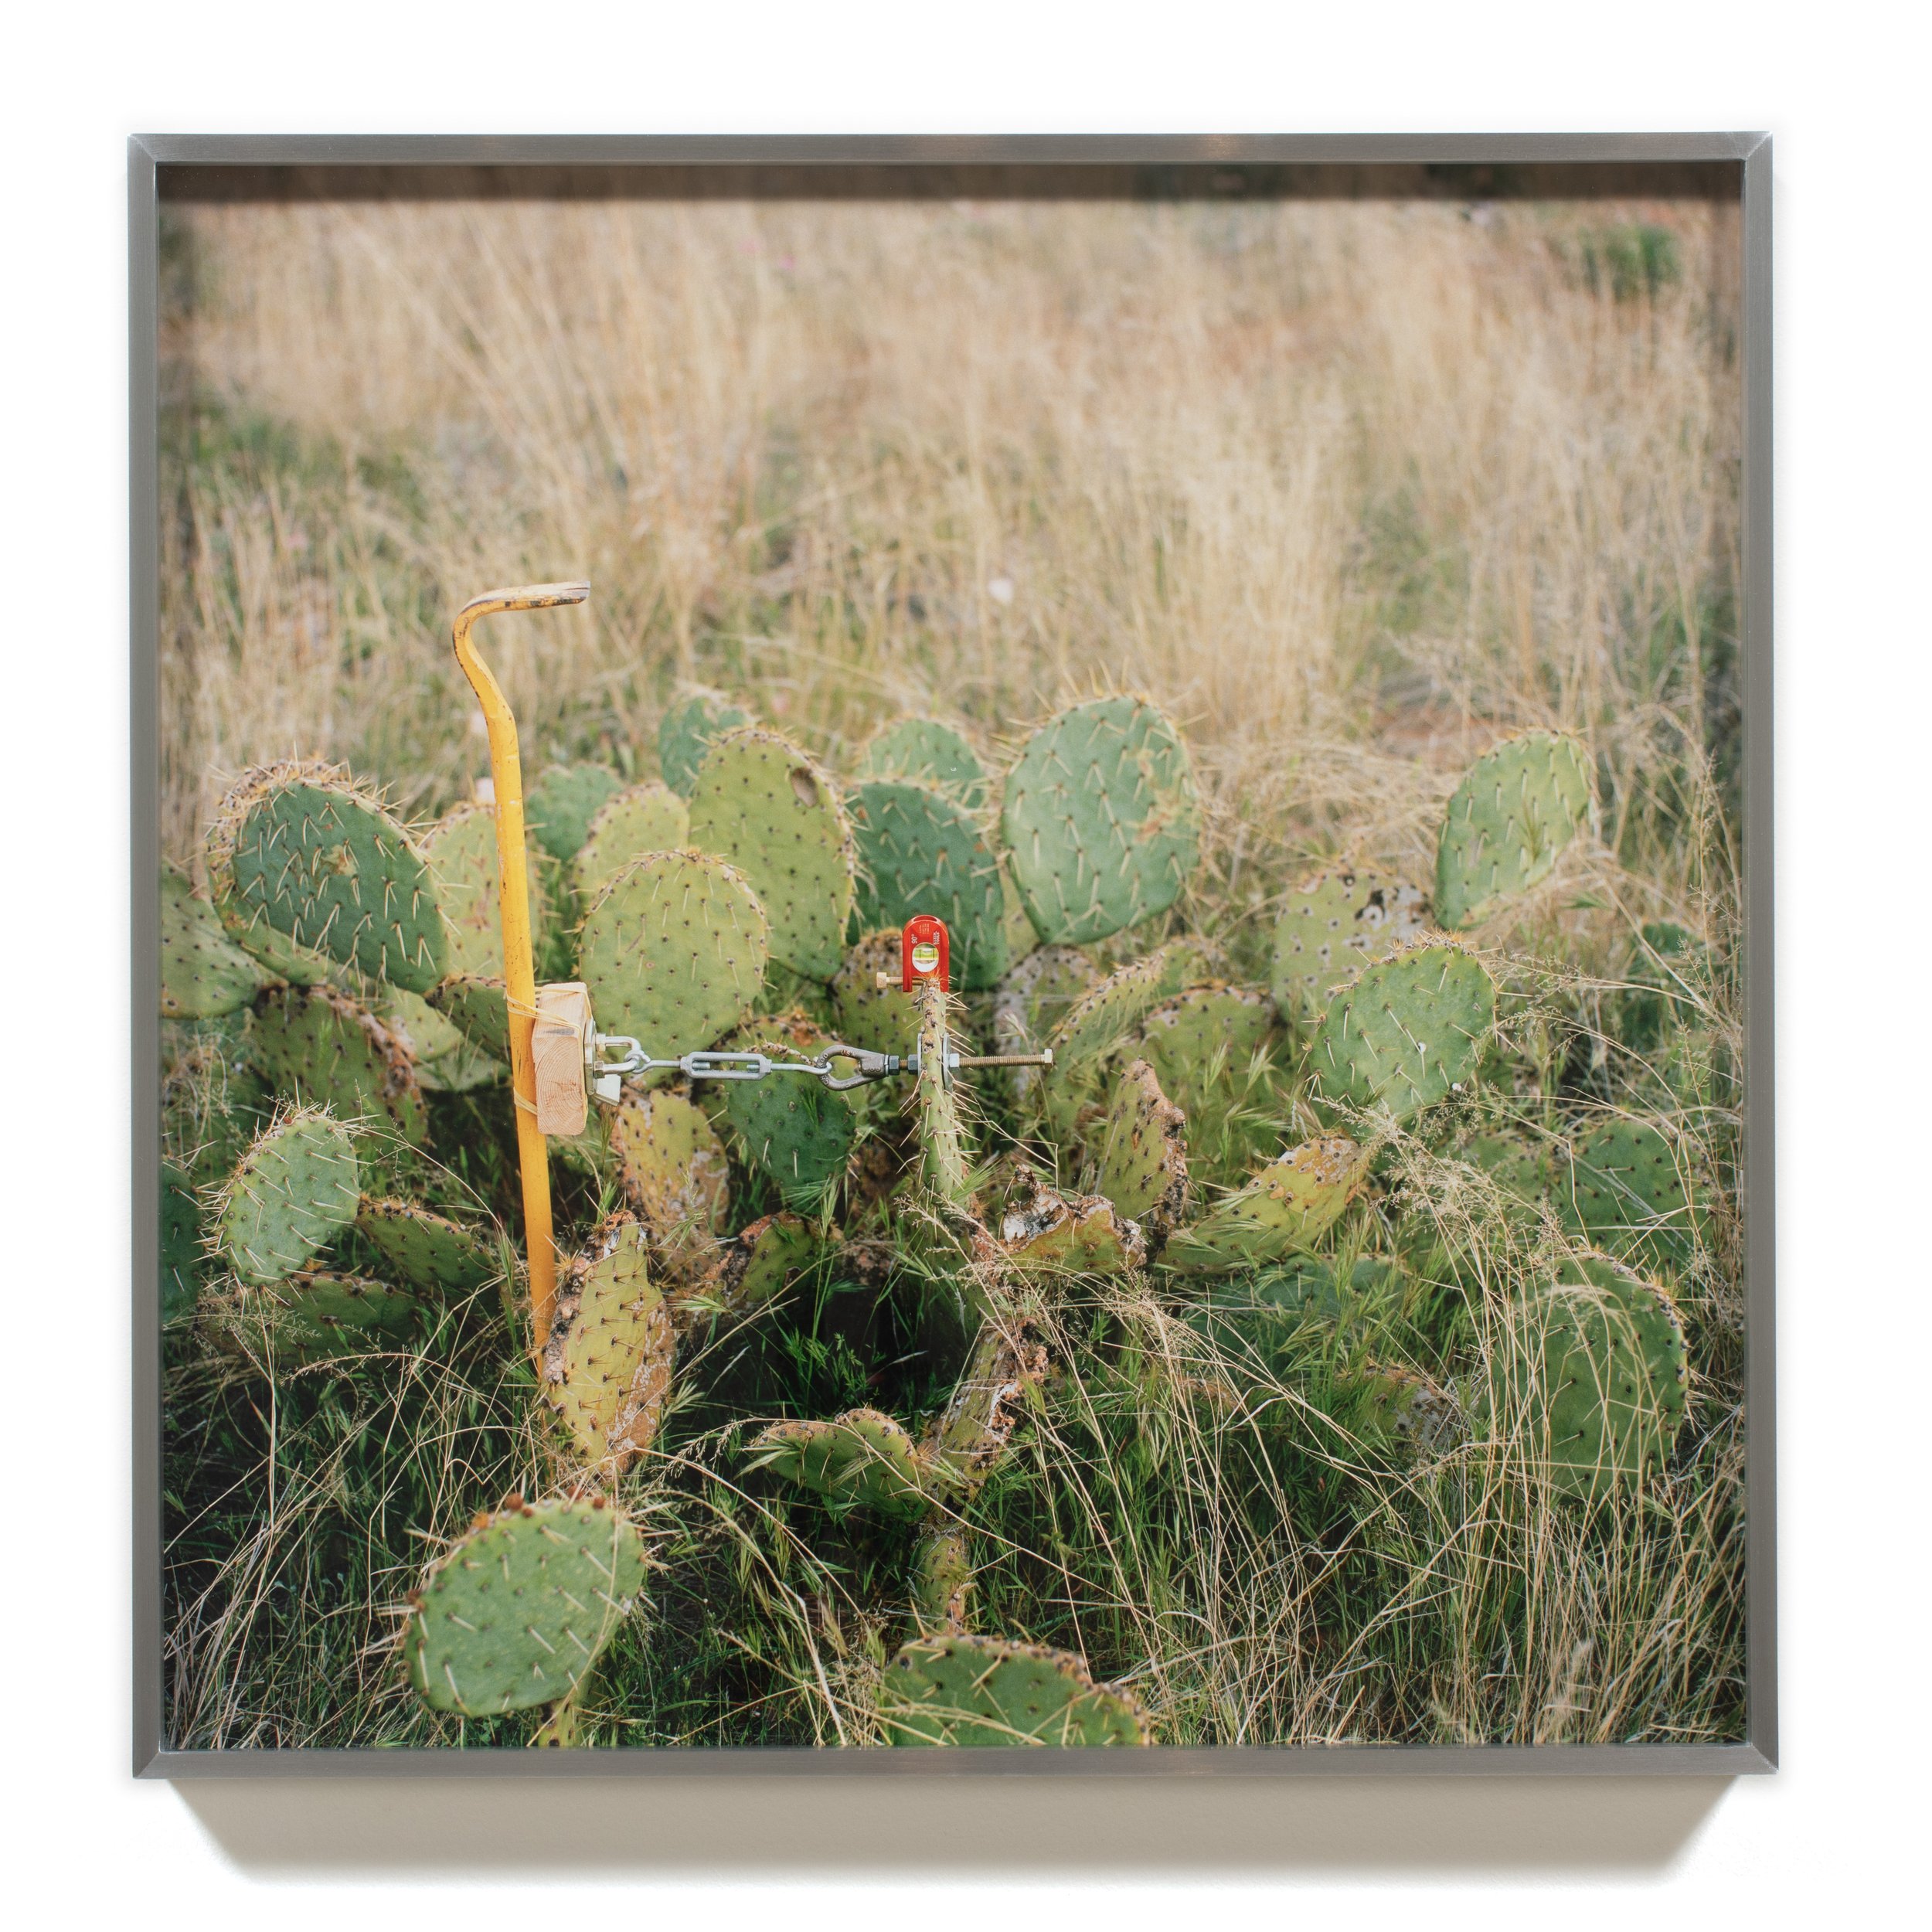  Rachael Browning  #69 03 , 2020 Archival pigment print 20 1/4 x 20 1/4 x 1 1/2 inches (framed) 